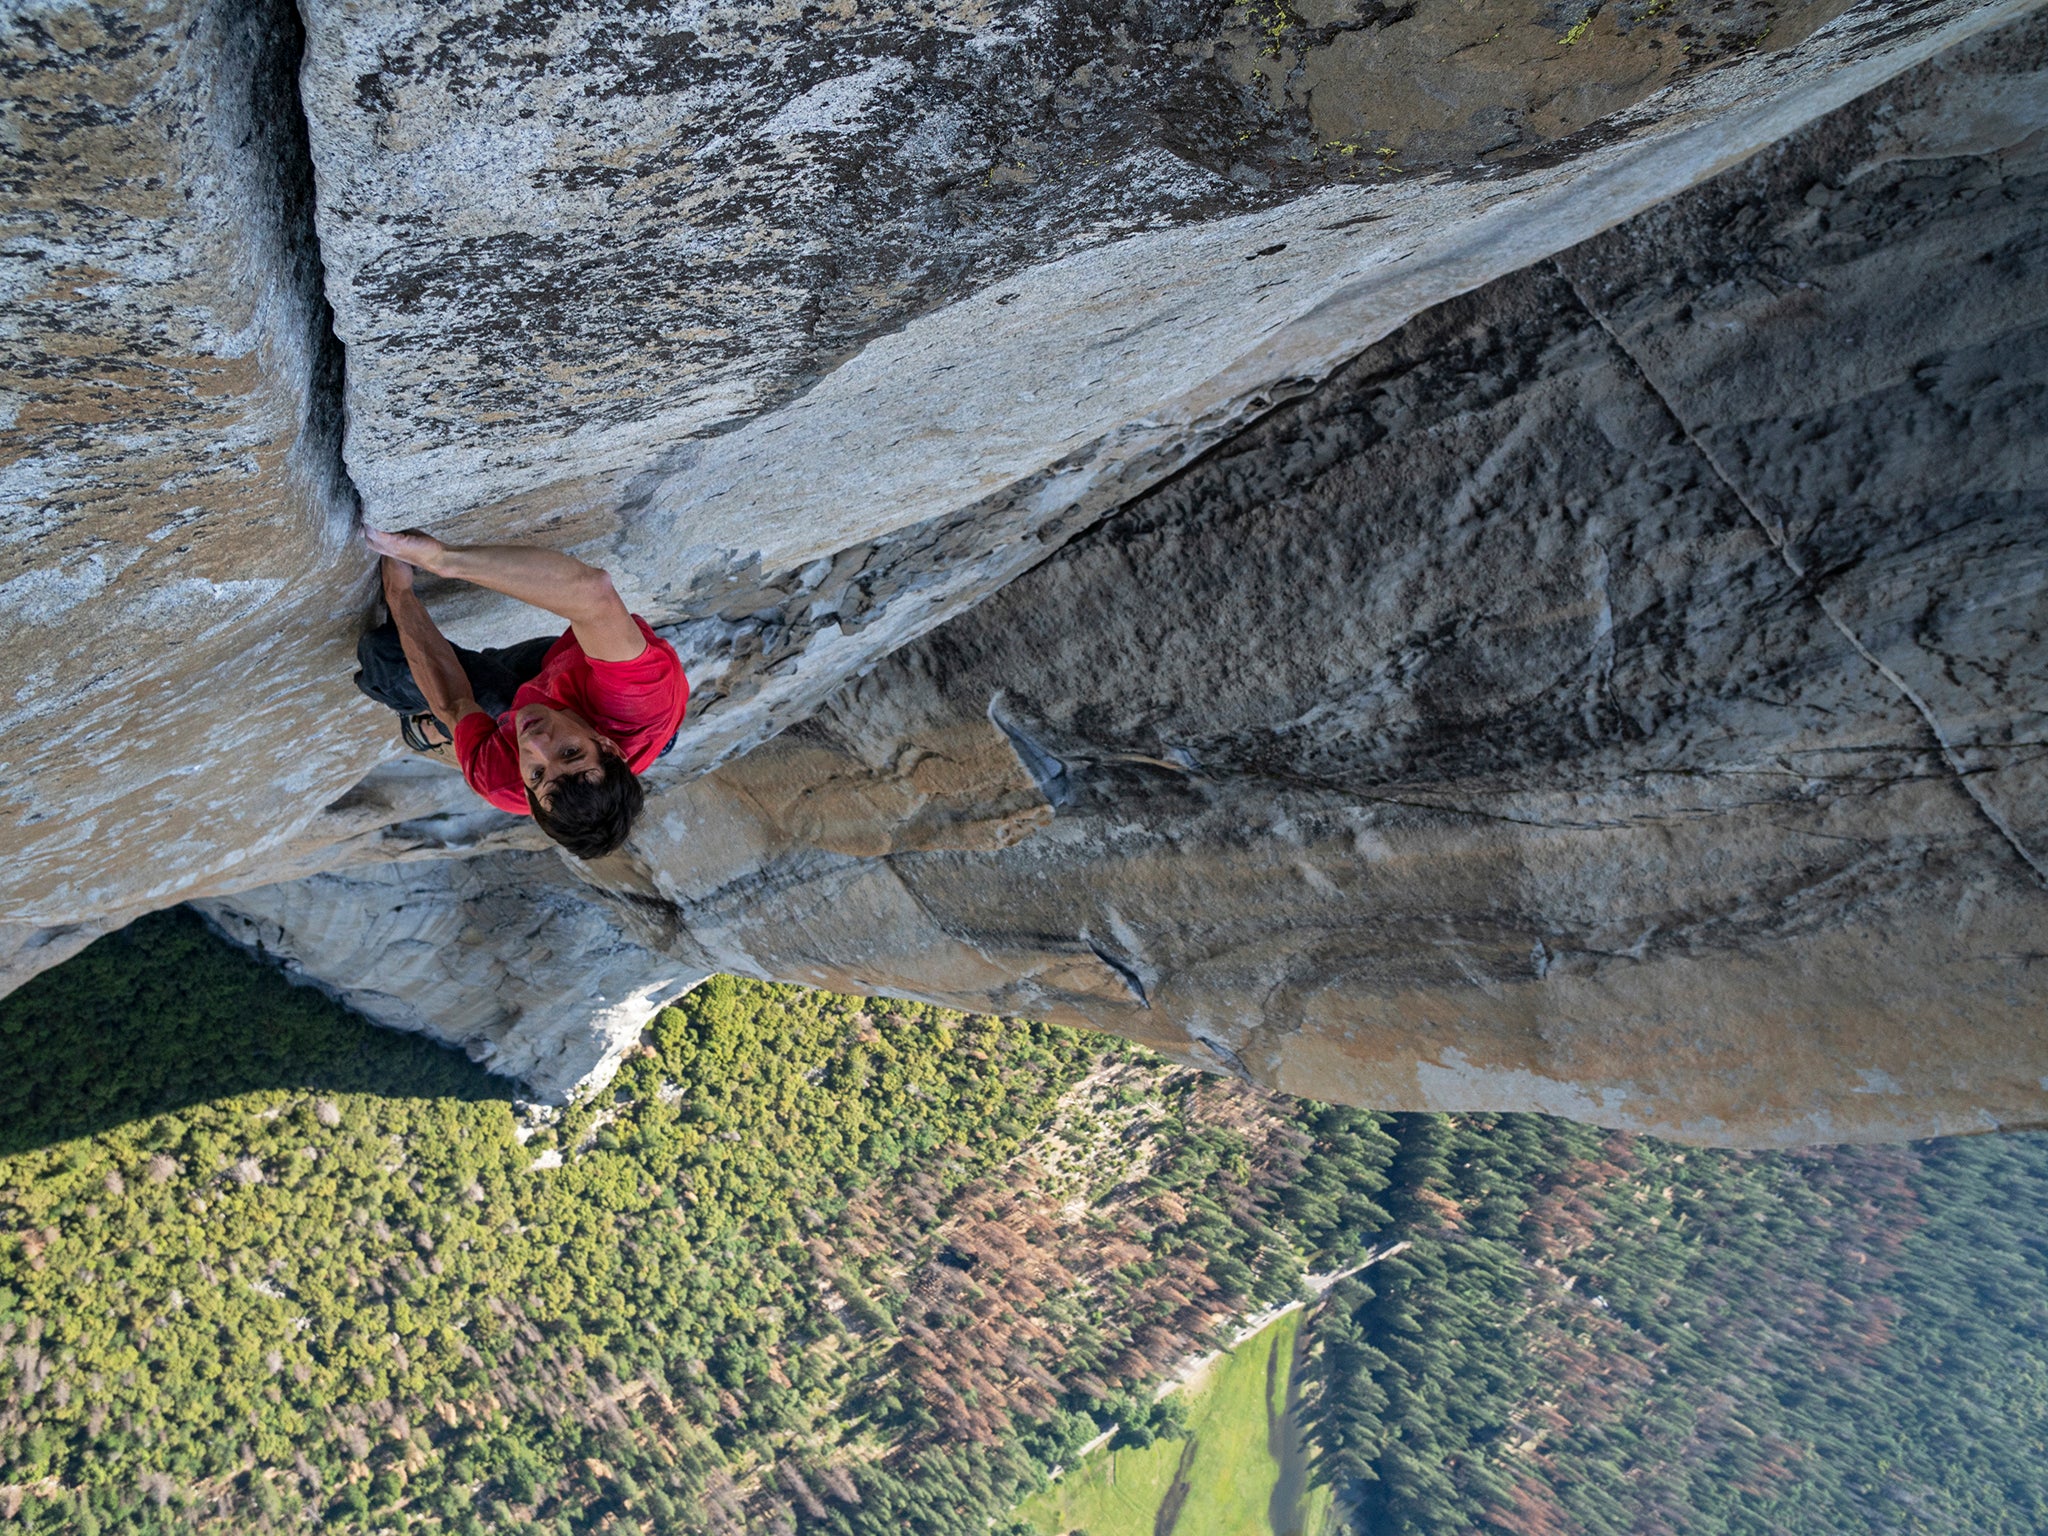 Honnold making the first free-solo ascent of El Capitan